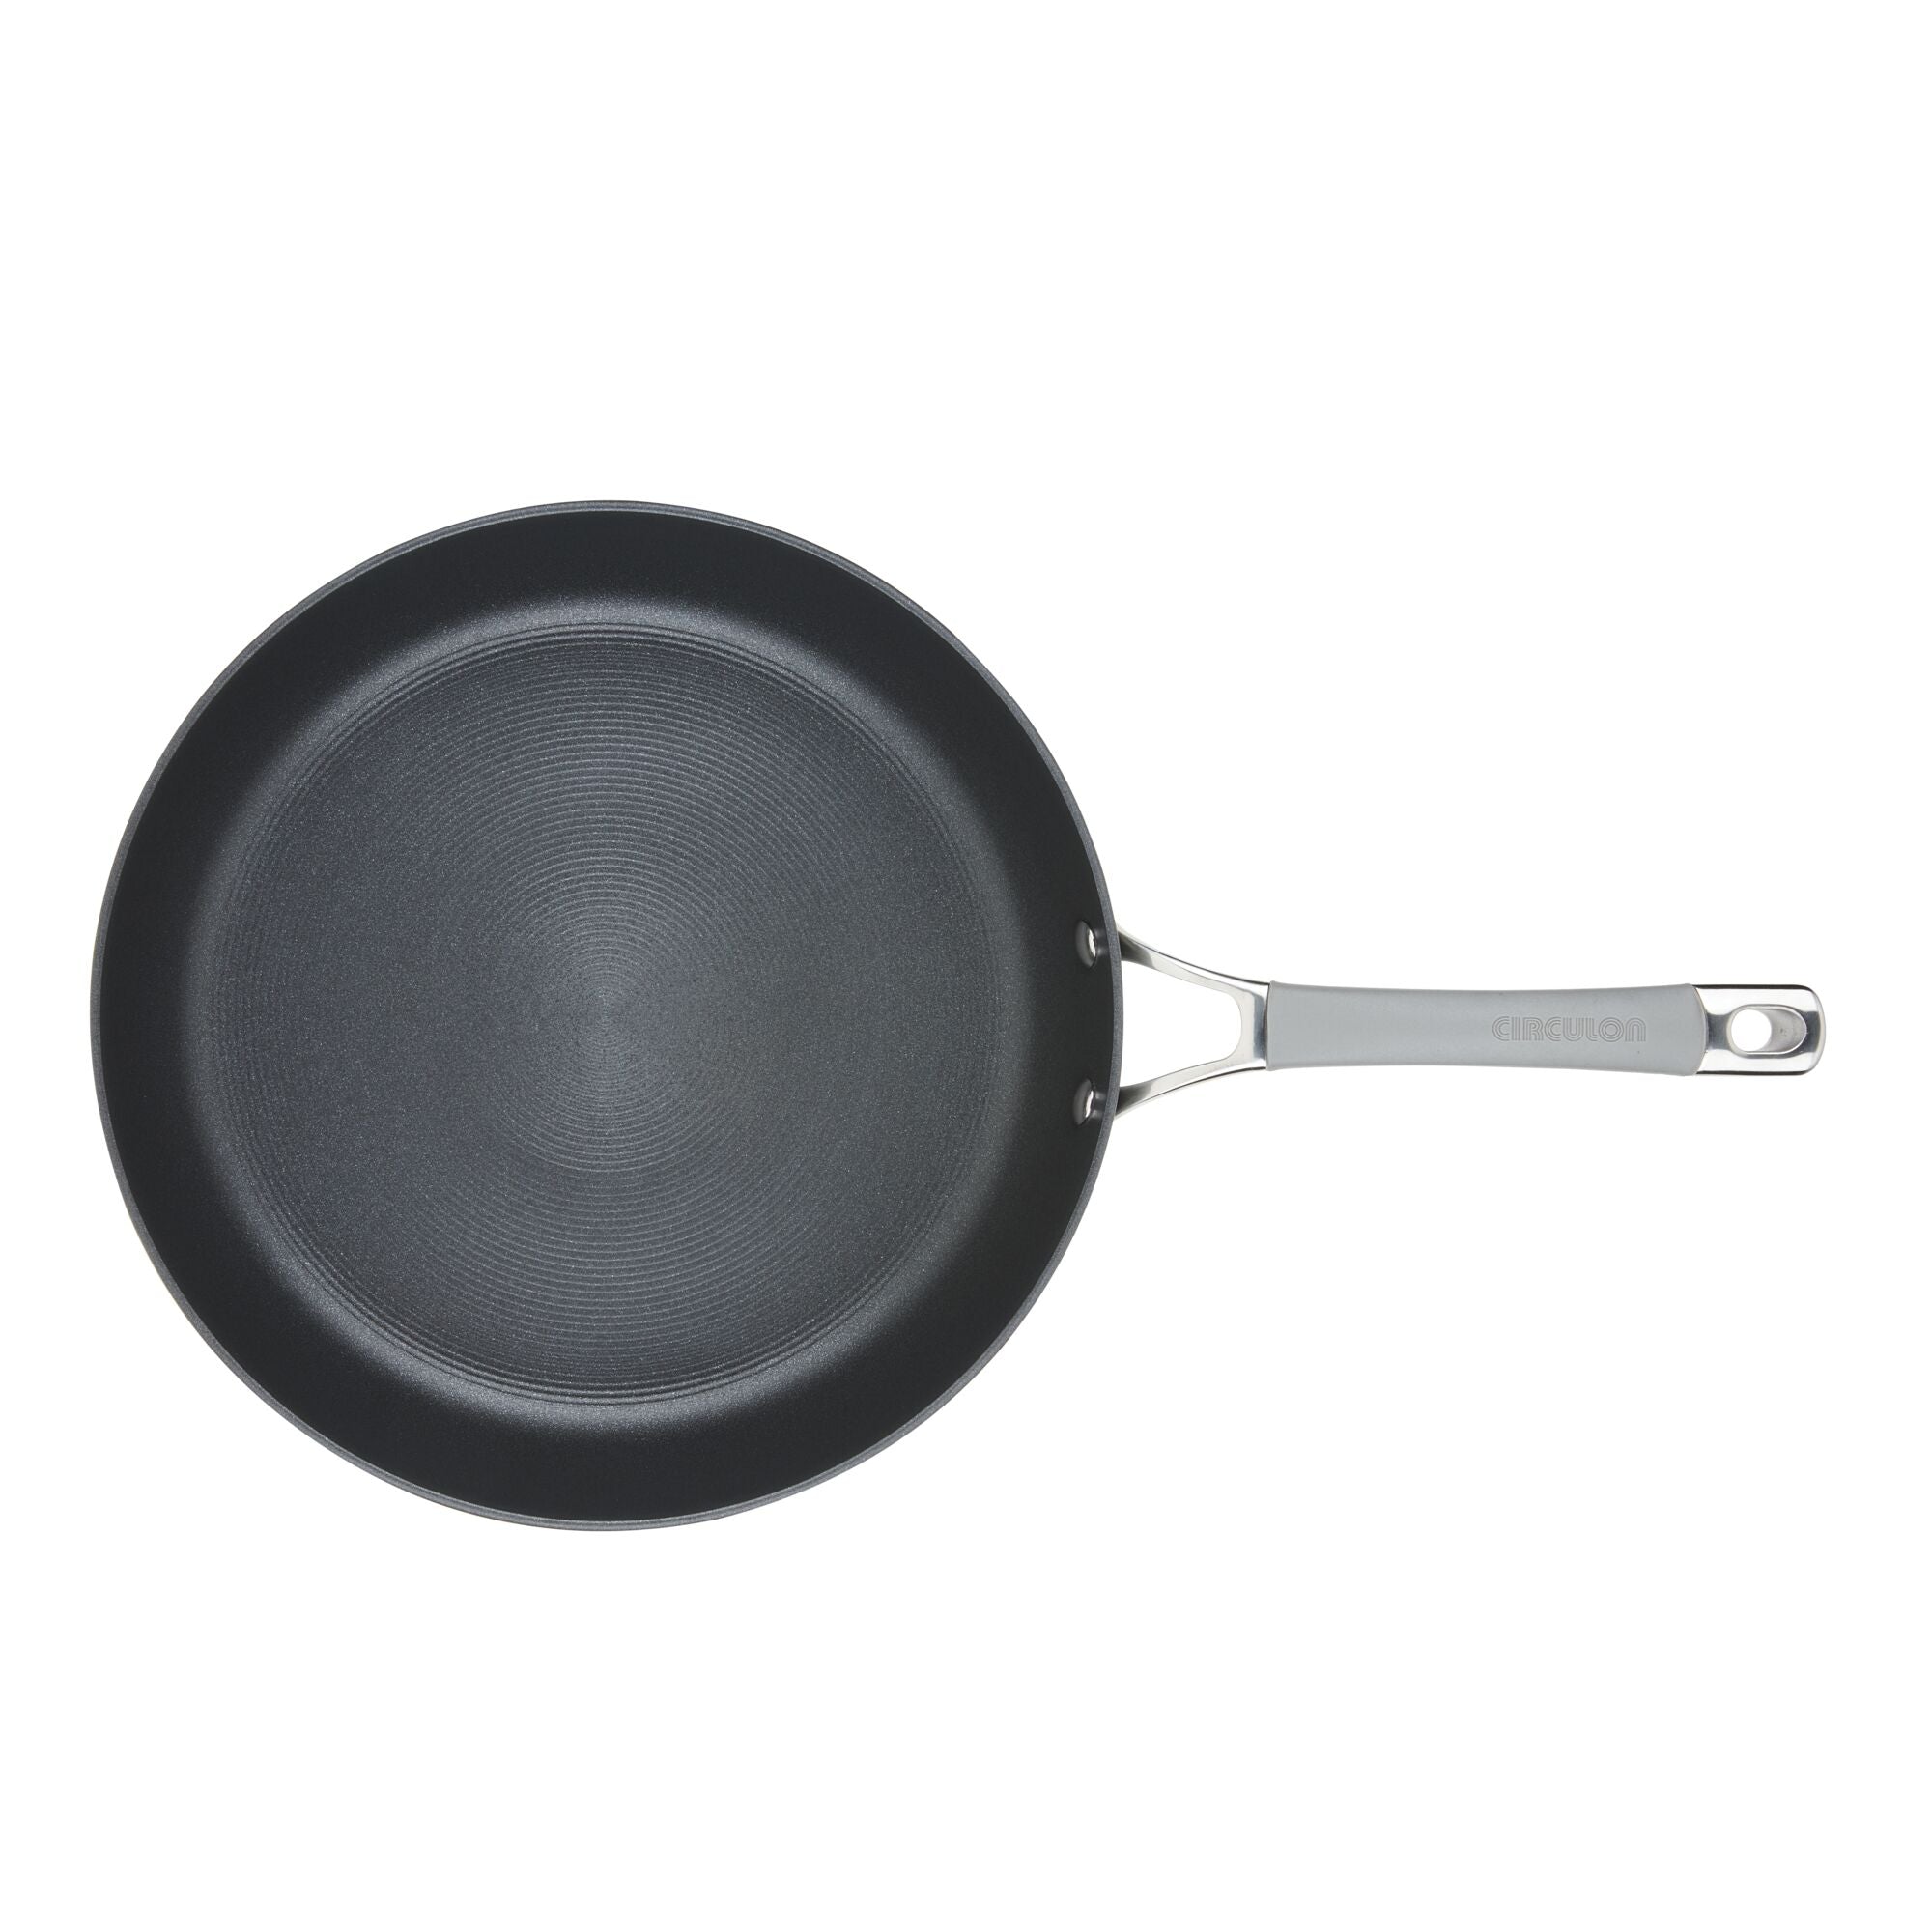 Circulon Nonstick Cookware 14” Wok And 10” Fry Pan for Sale in